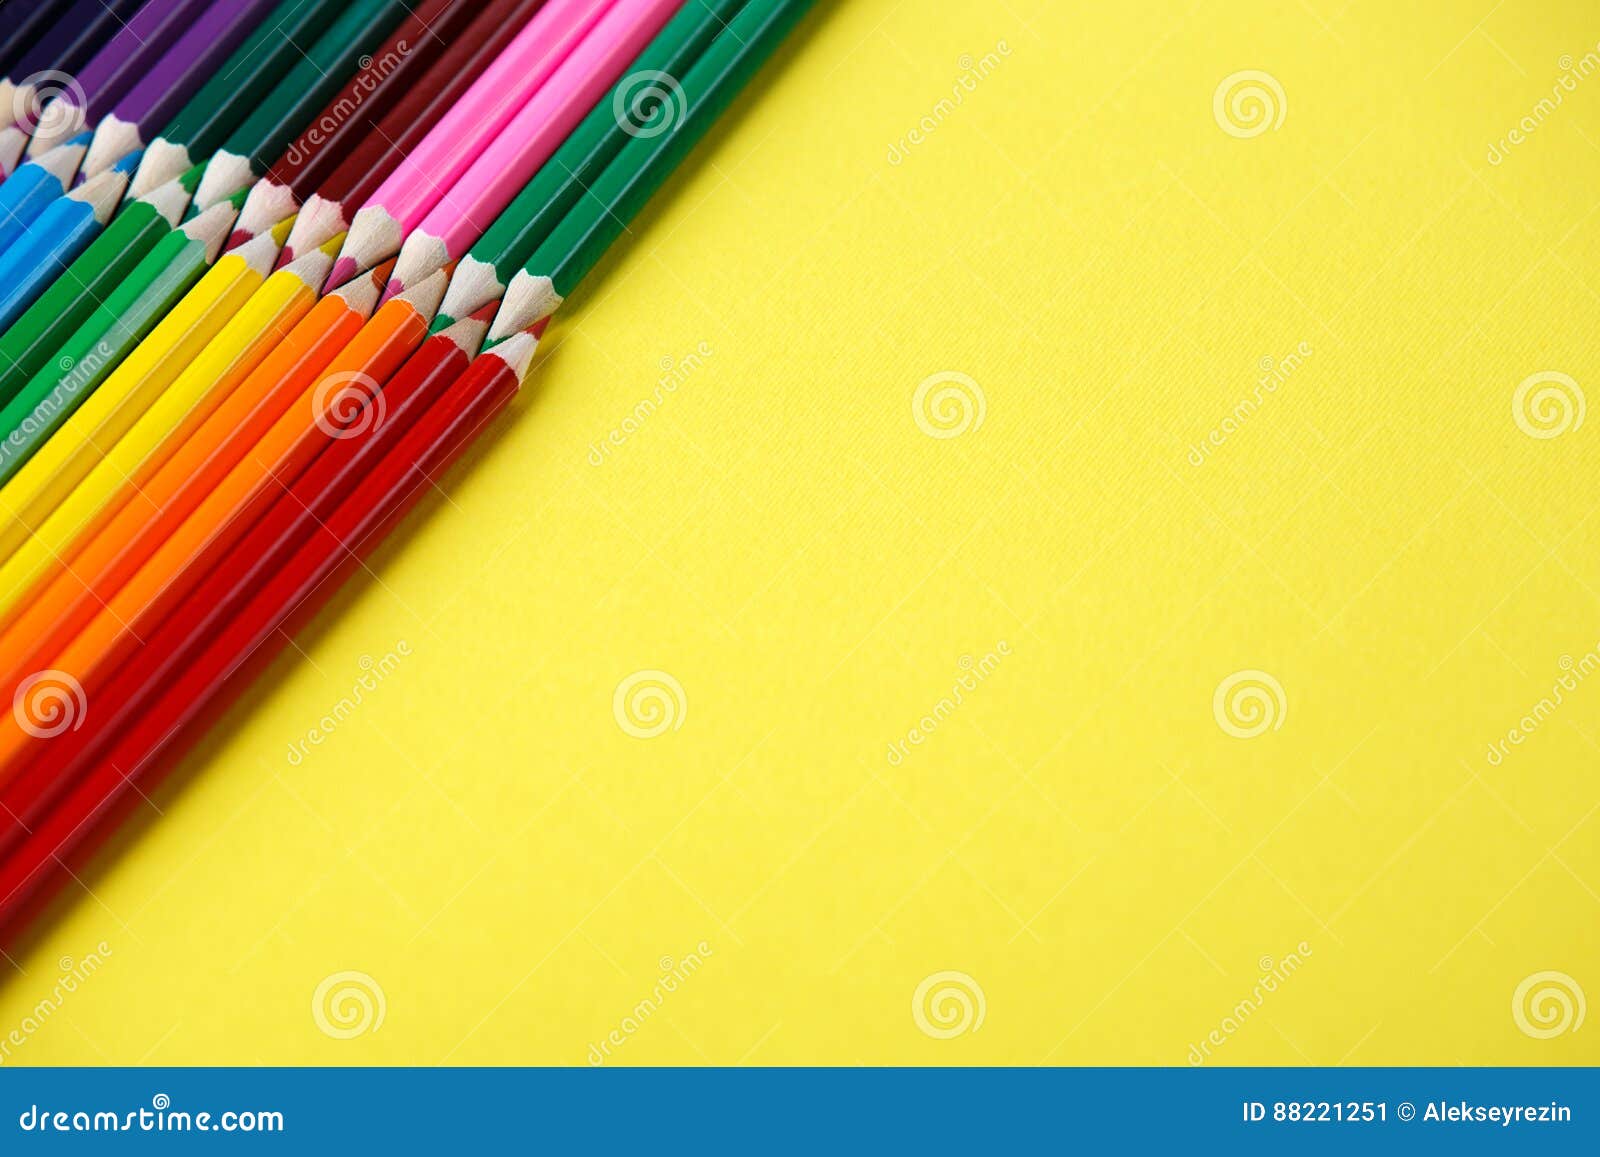 Colored Pencils Angle. Many Different Colored Pencils on Yellow Background  Stock Image - Image of colorimage, highangleview: 88221251